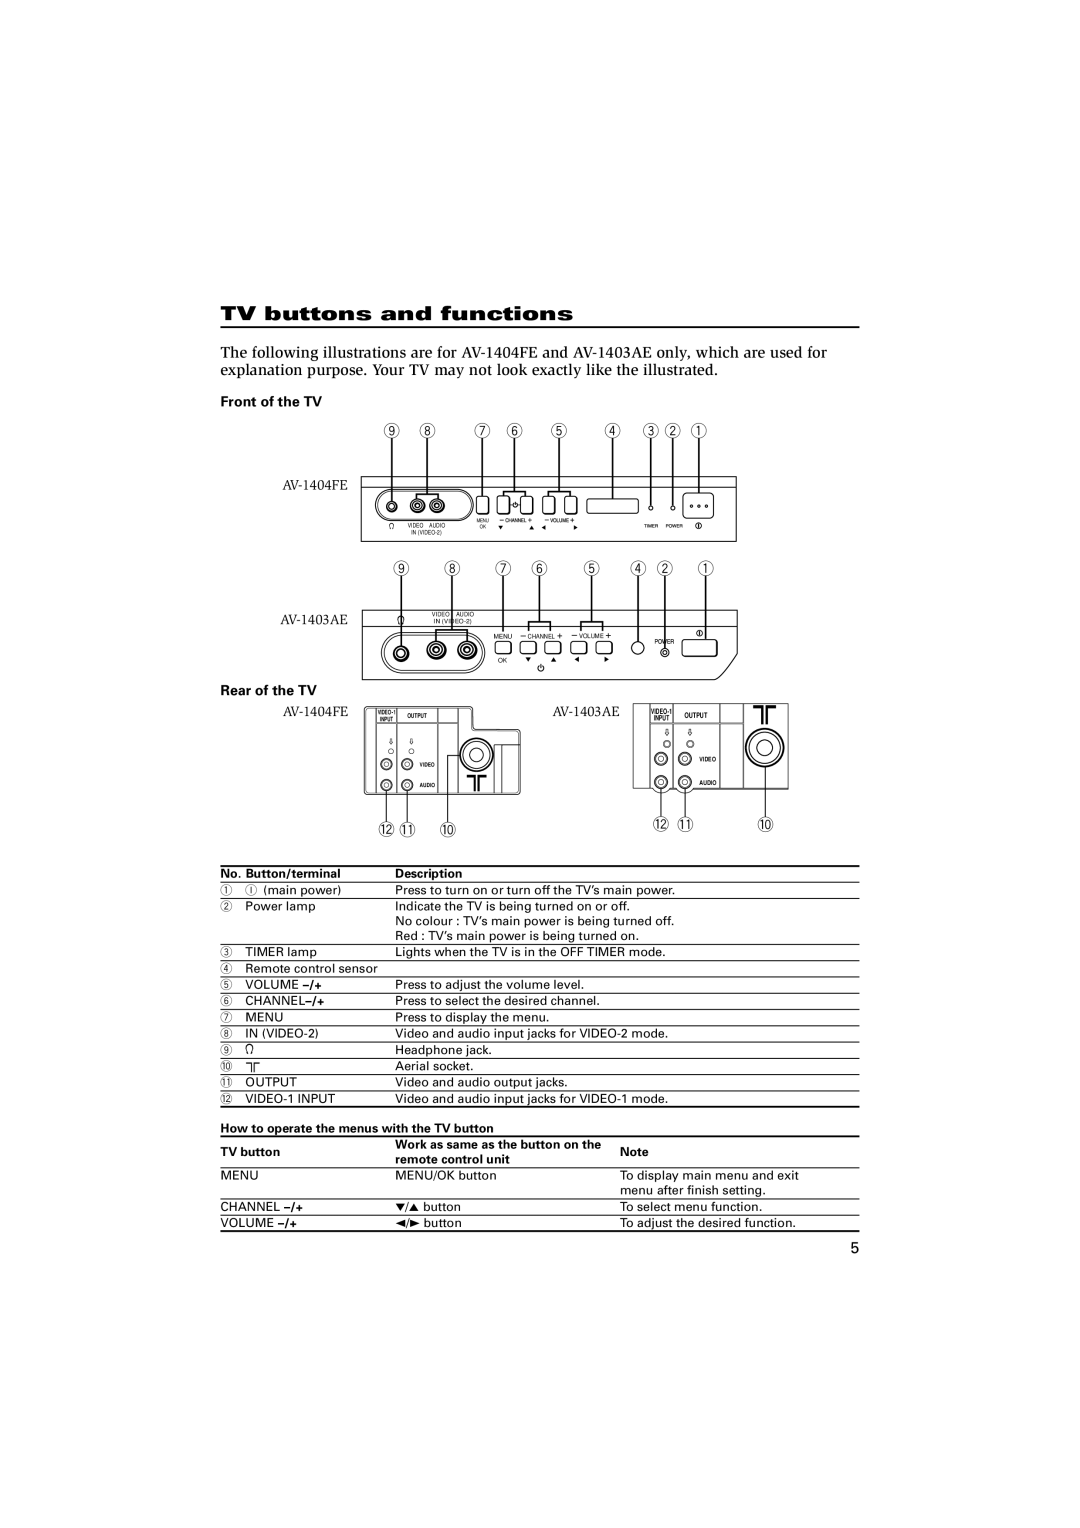 JVC TV buttons and functions, Front of the TV, Rear of the TV, No. Button/terminal, Description, remote control unit 